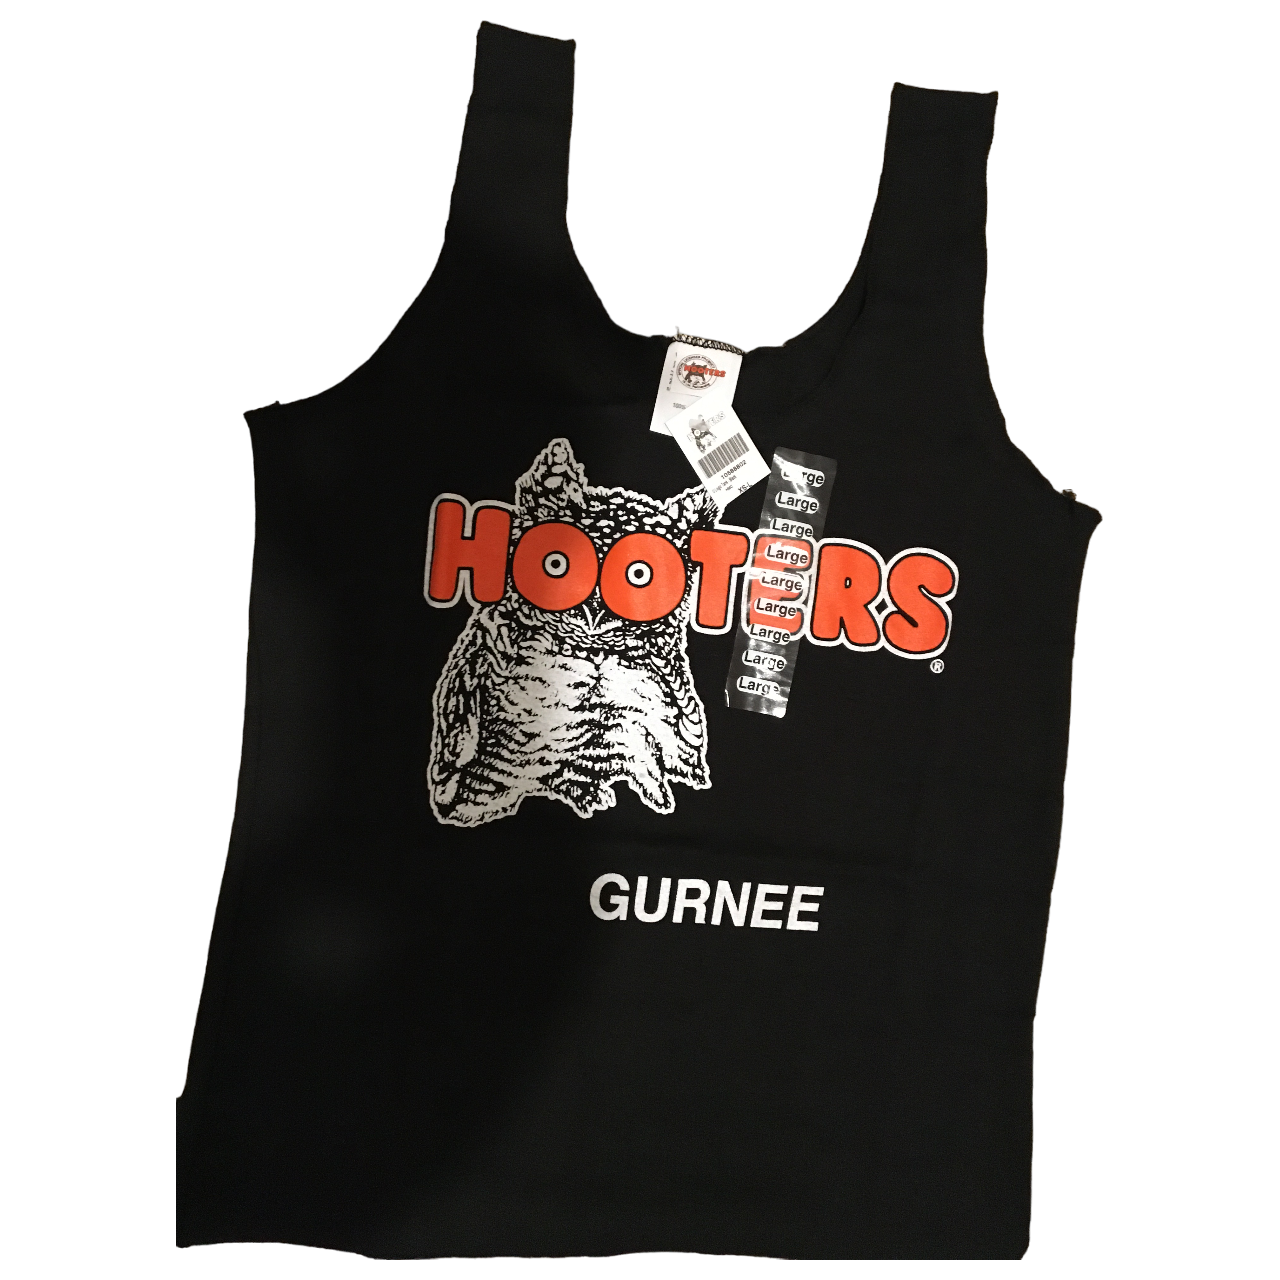 Gurnee IL Hooters Women's Outfit Costume Black Tank Top